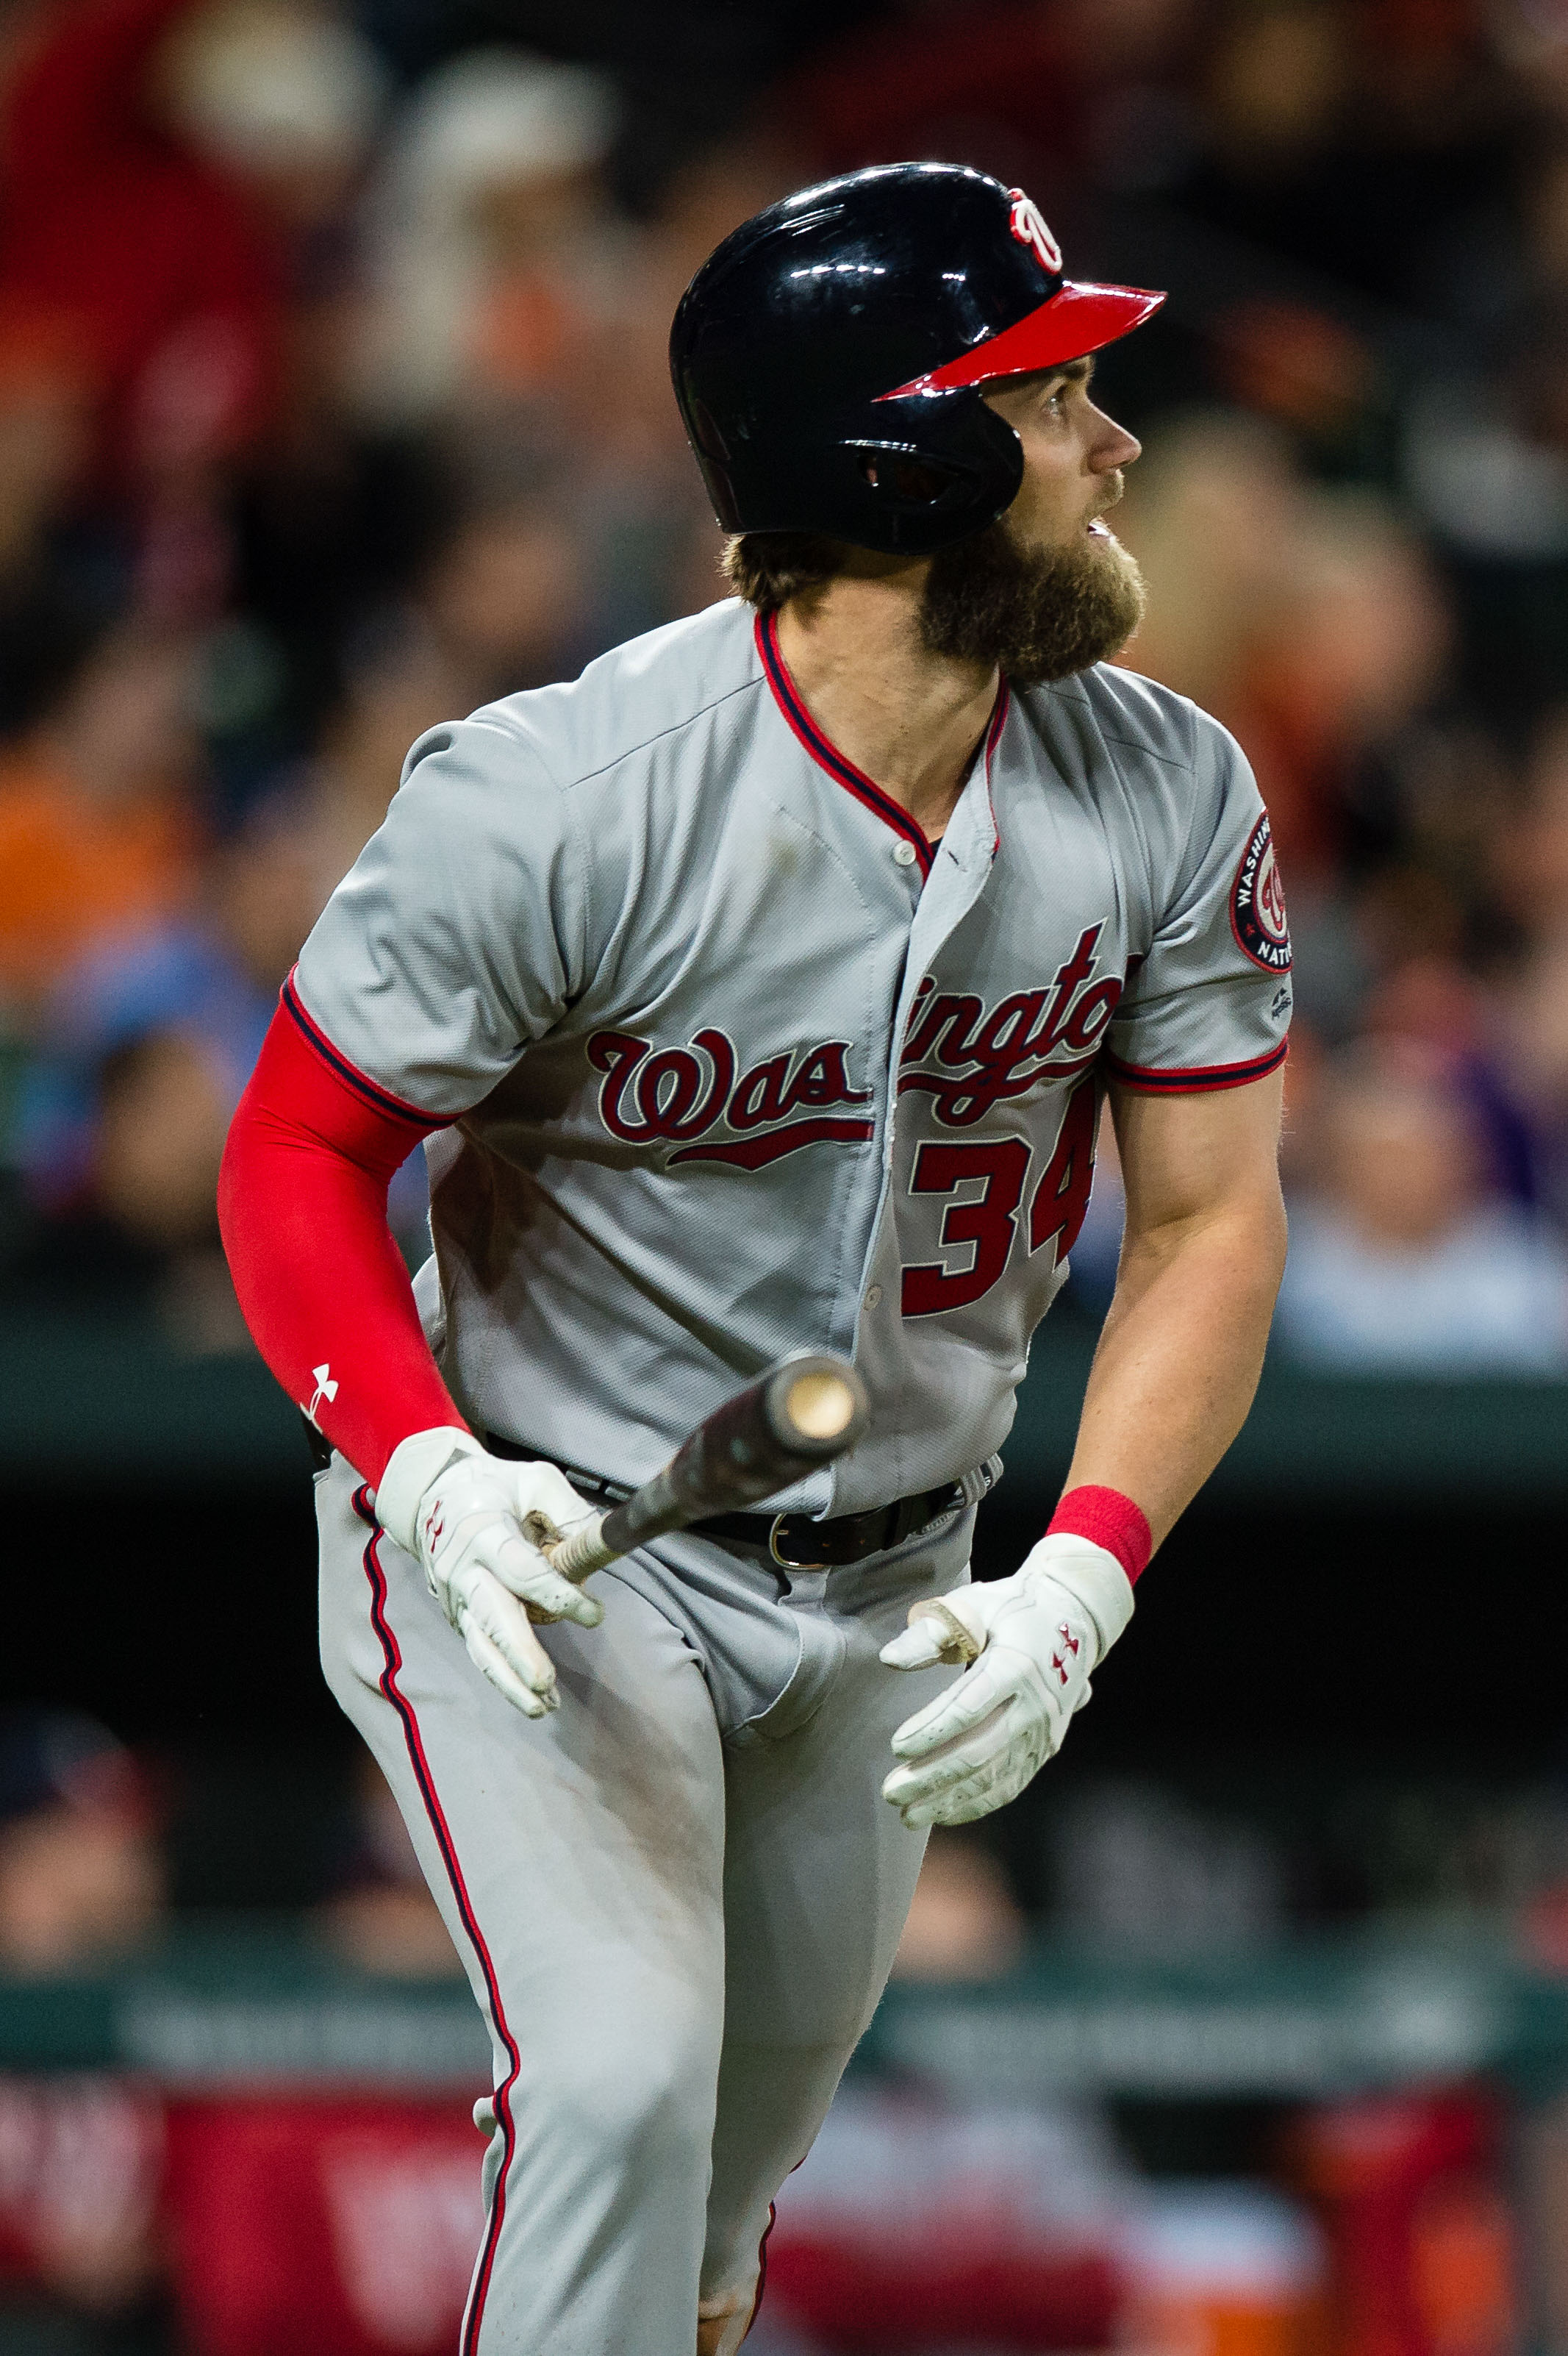 Pros, cons of Nationals signing Bryce Harper